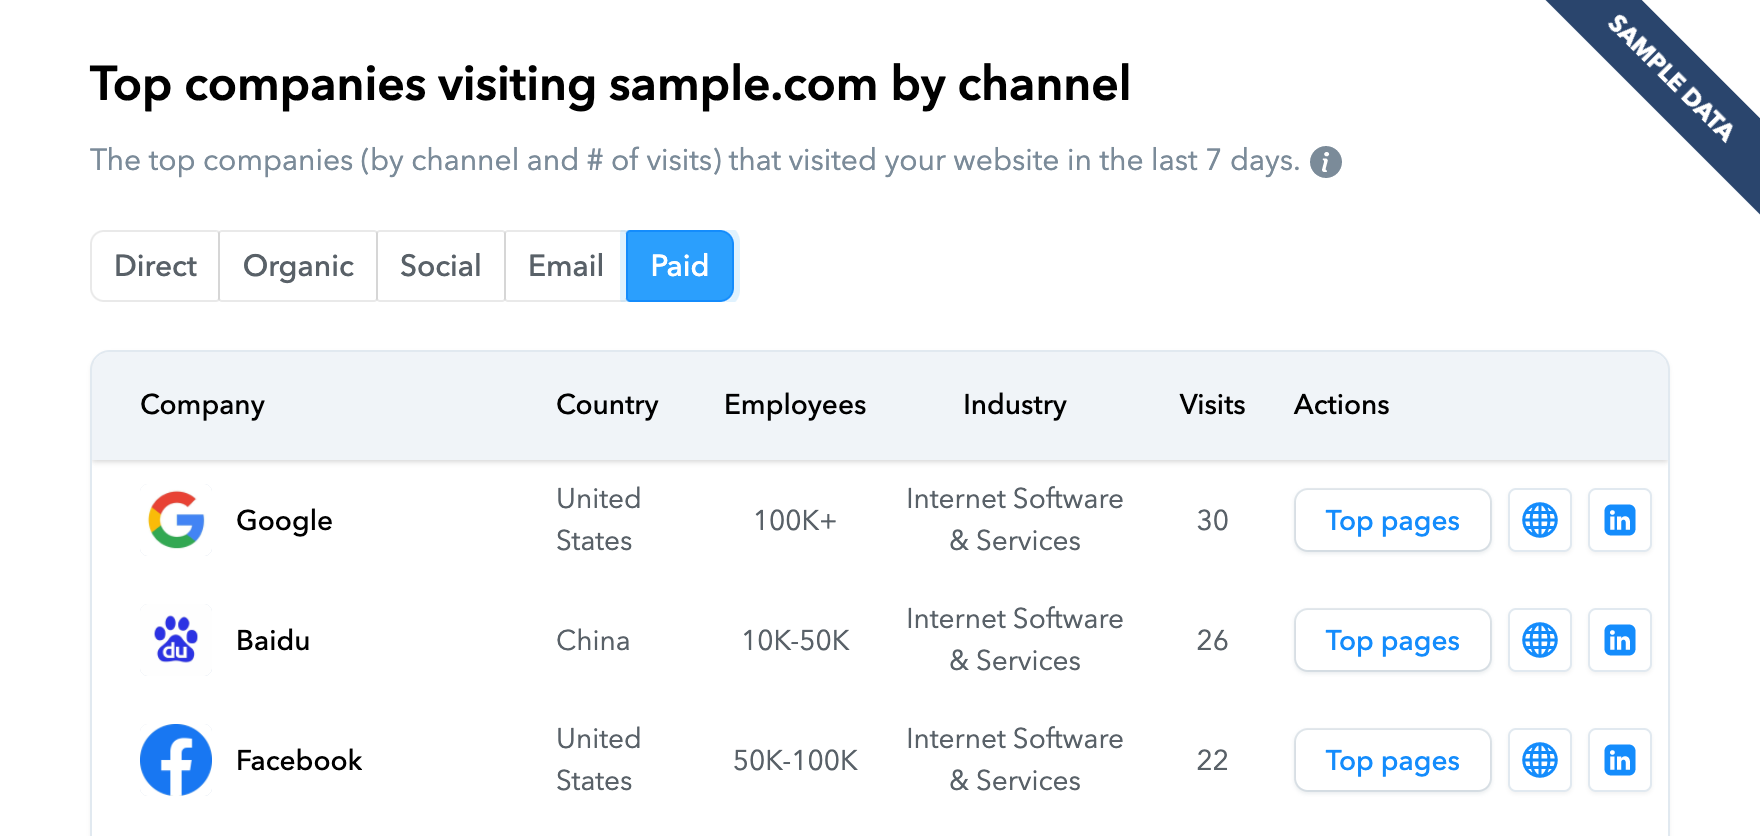 visitor tracking report showing top companies by channel